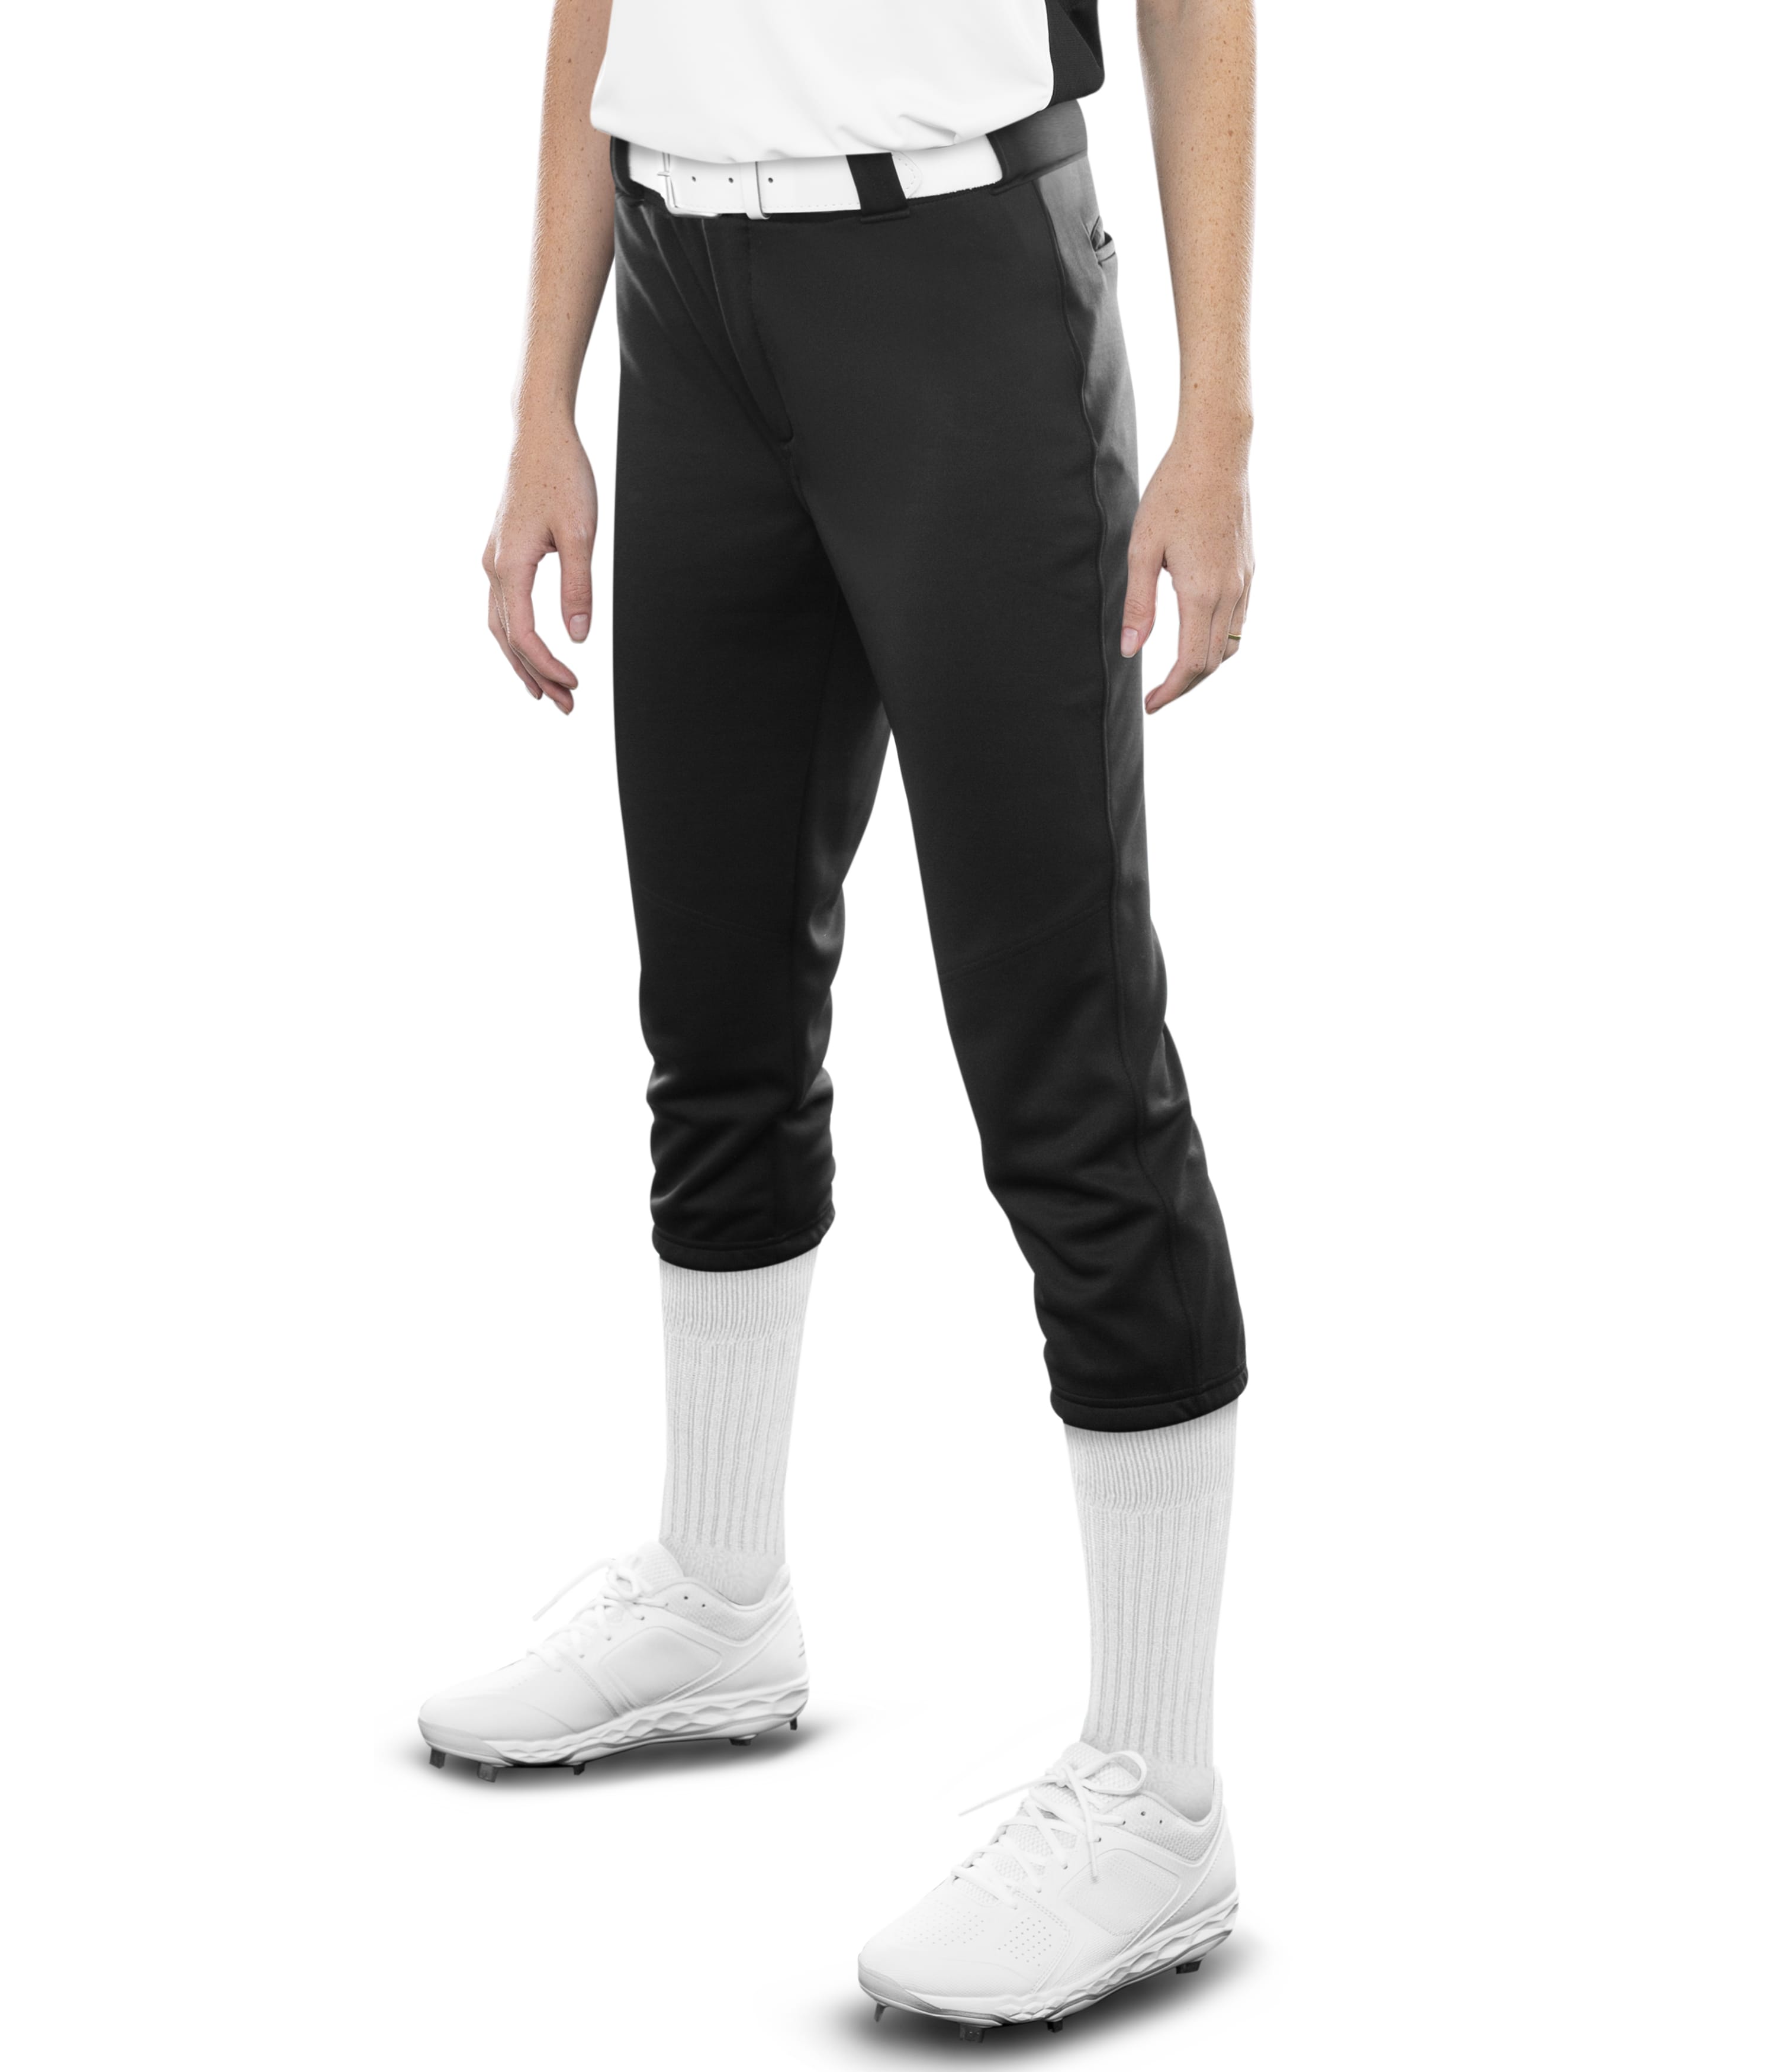 Russell R16LSX  Ladies Flexstretch Softball Pant with Belt Loops